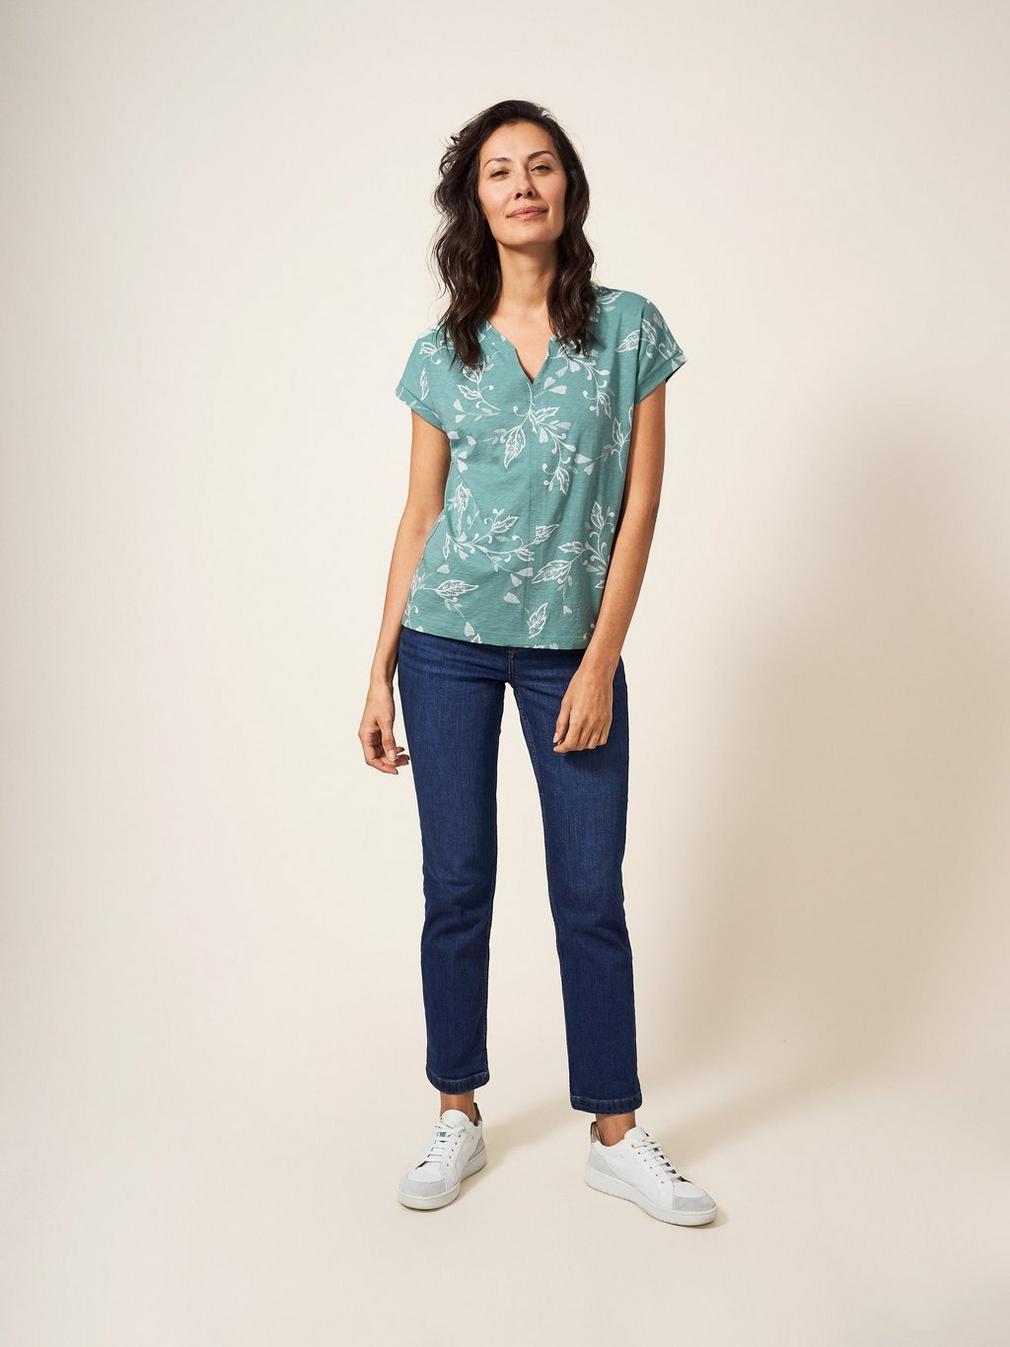 Nelly Notch Neck Tee in TEAL PR - MODEL FRONT